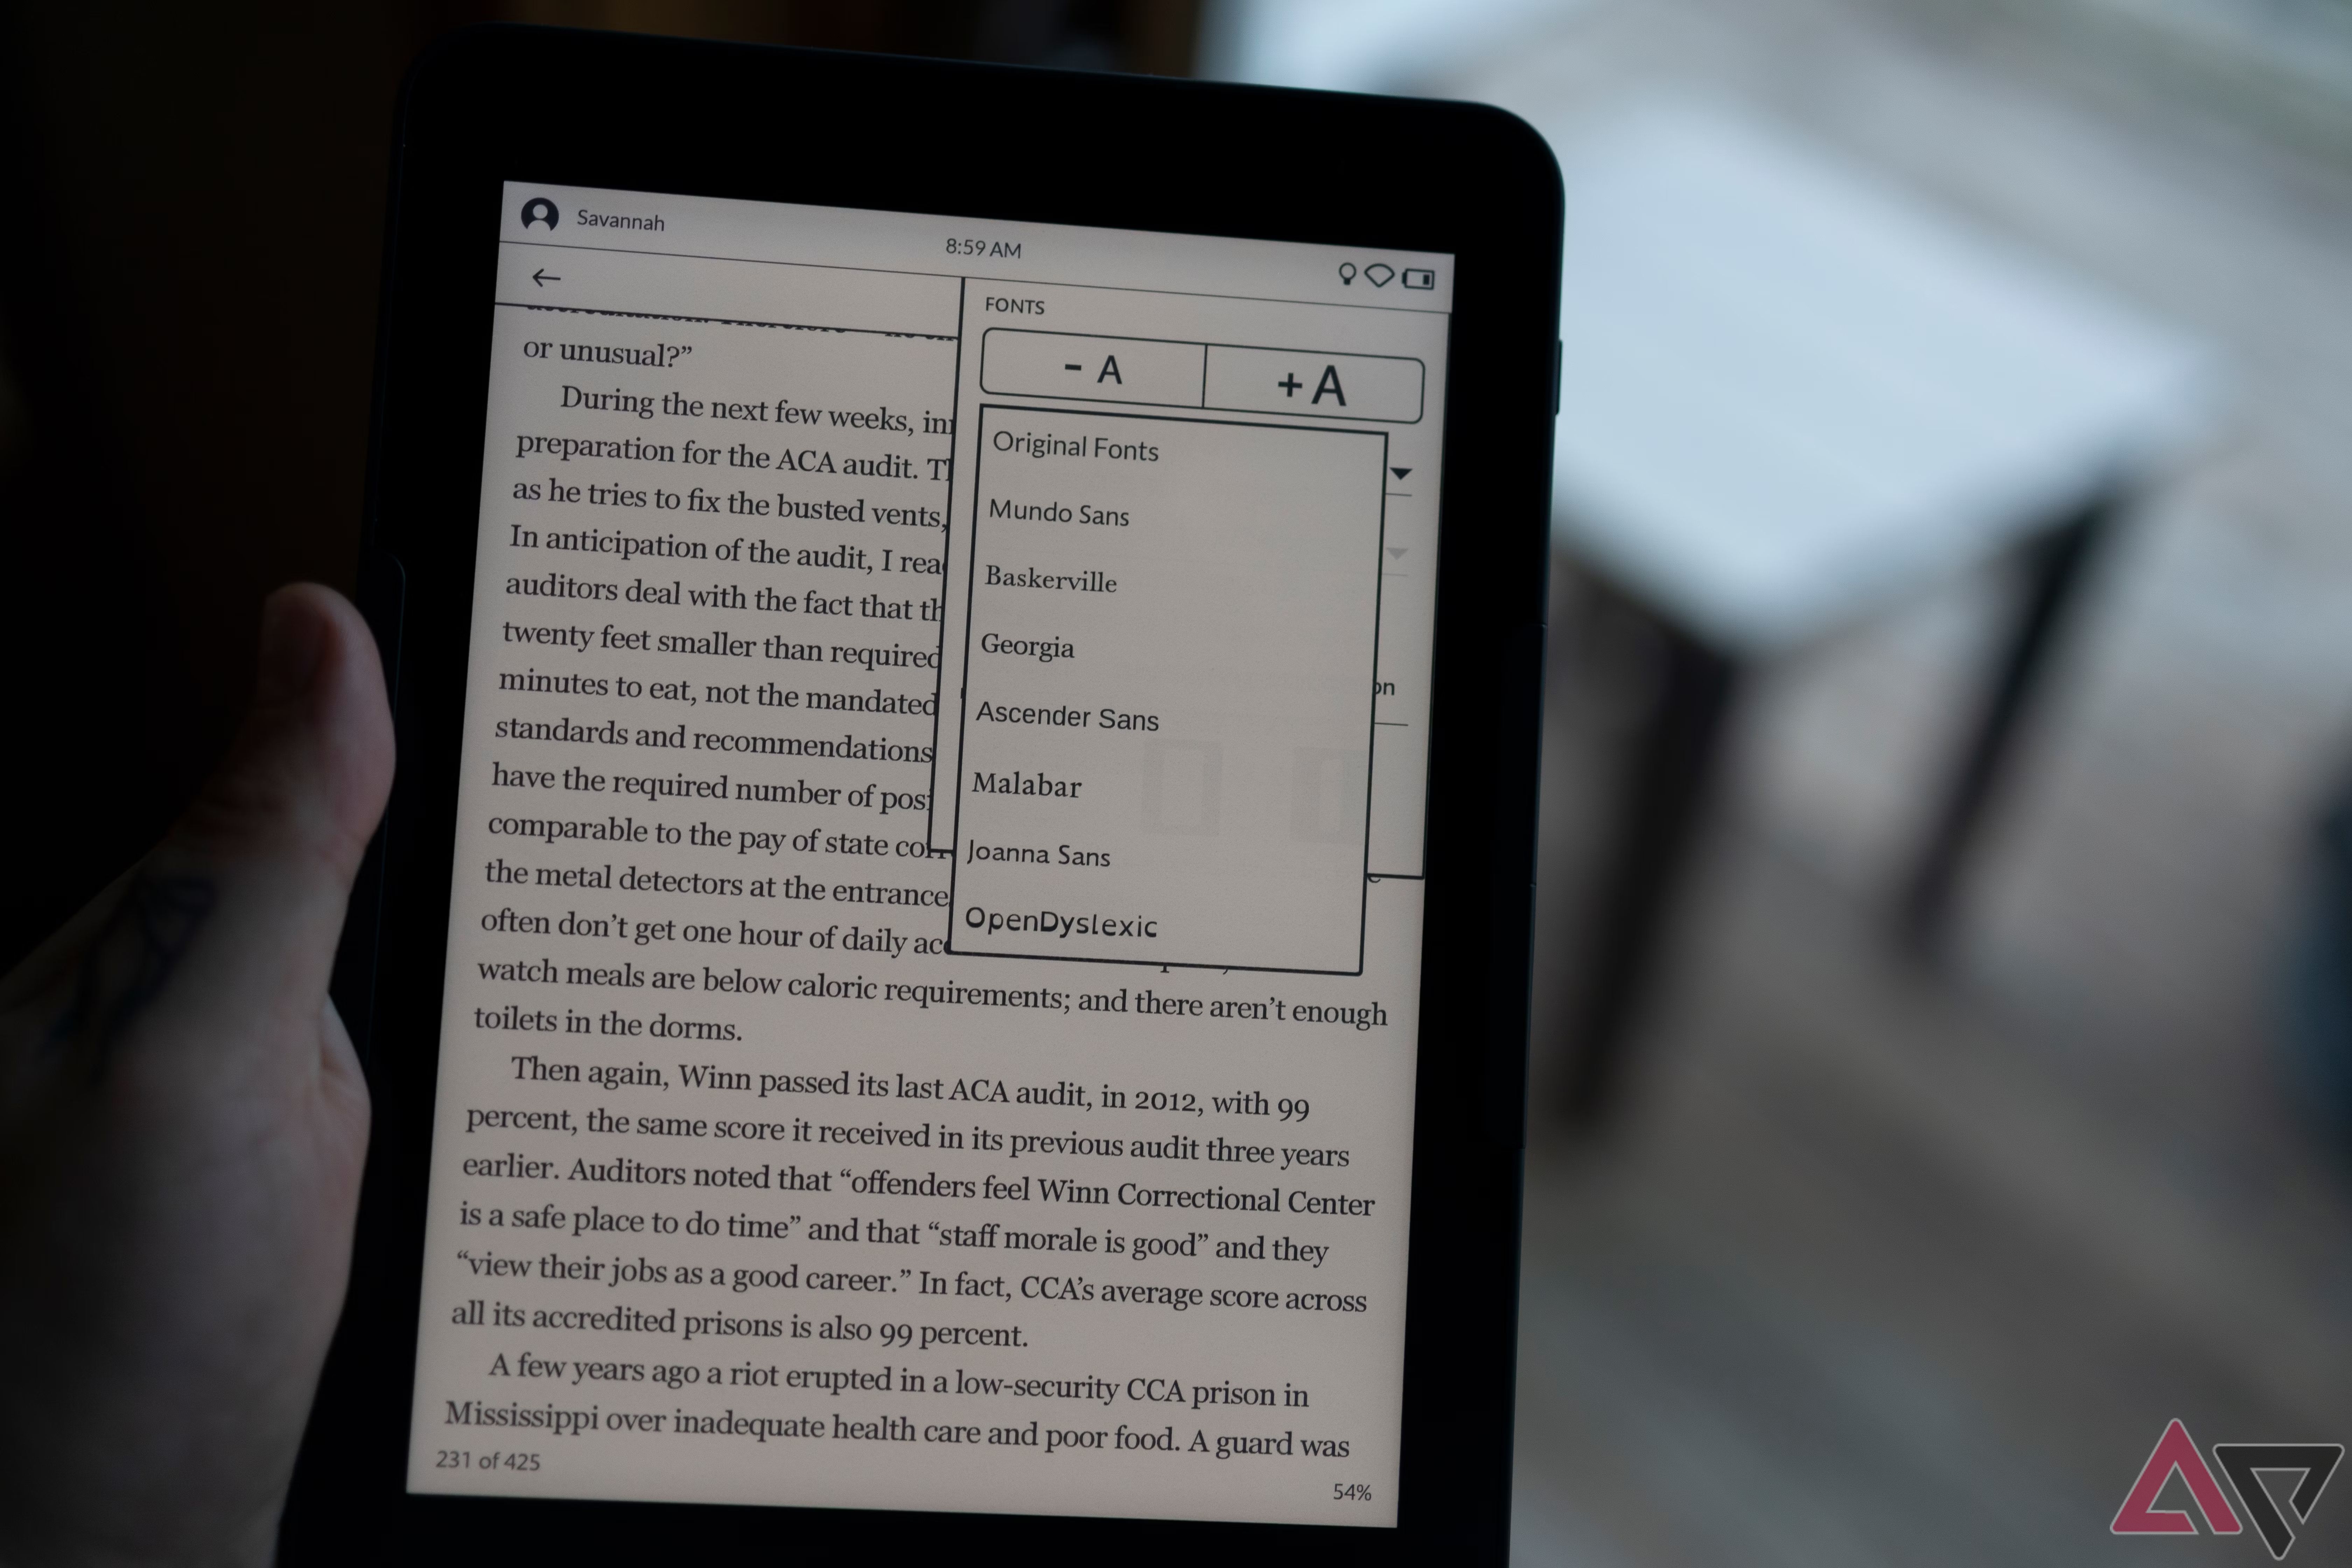 Kindle Paperwhite Vs. Nook GlowLight 4: Which E-Reader Is Better?